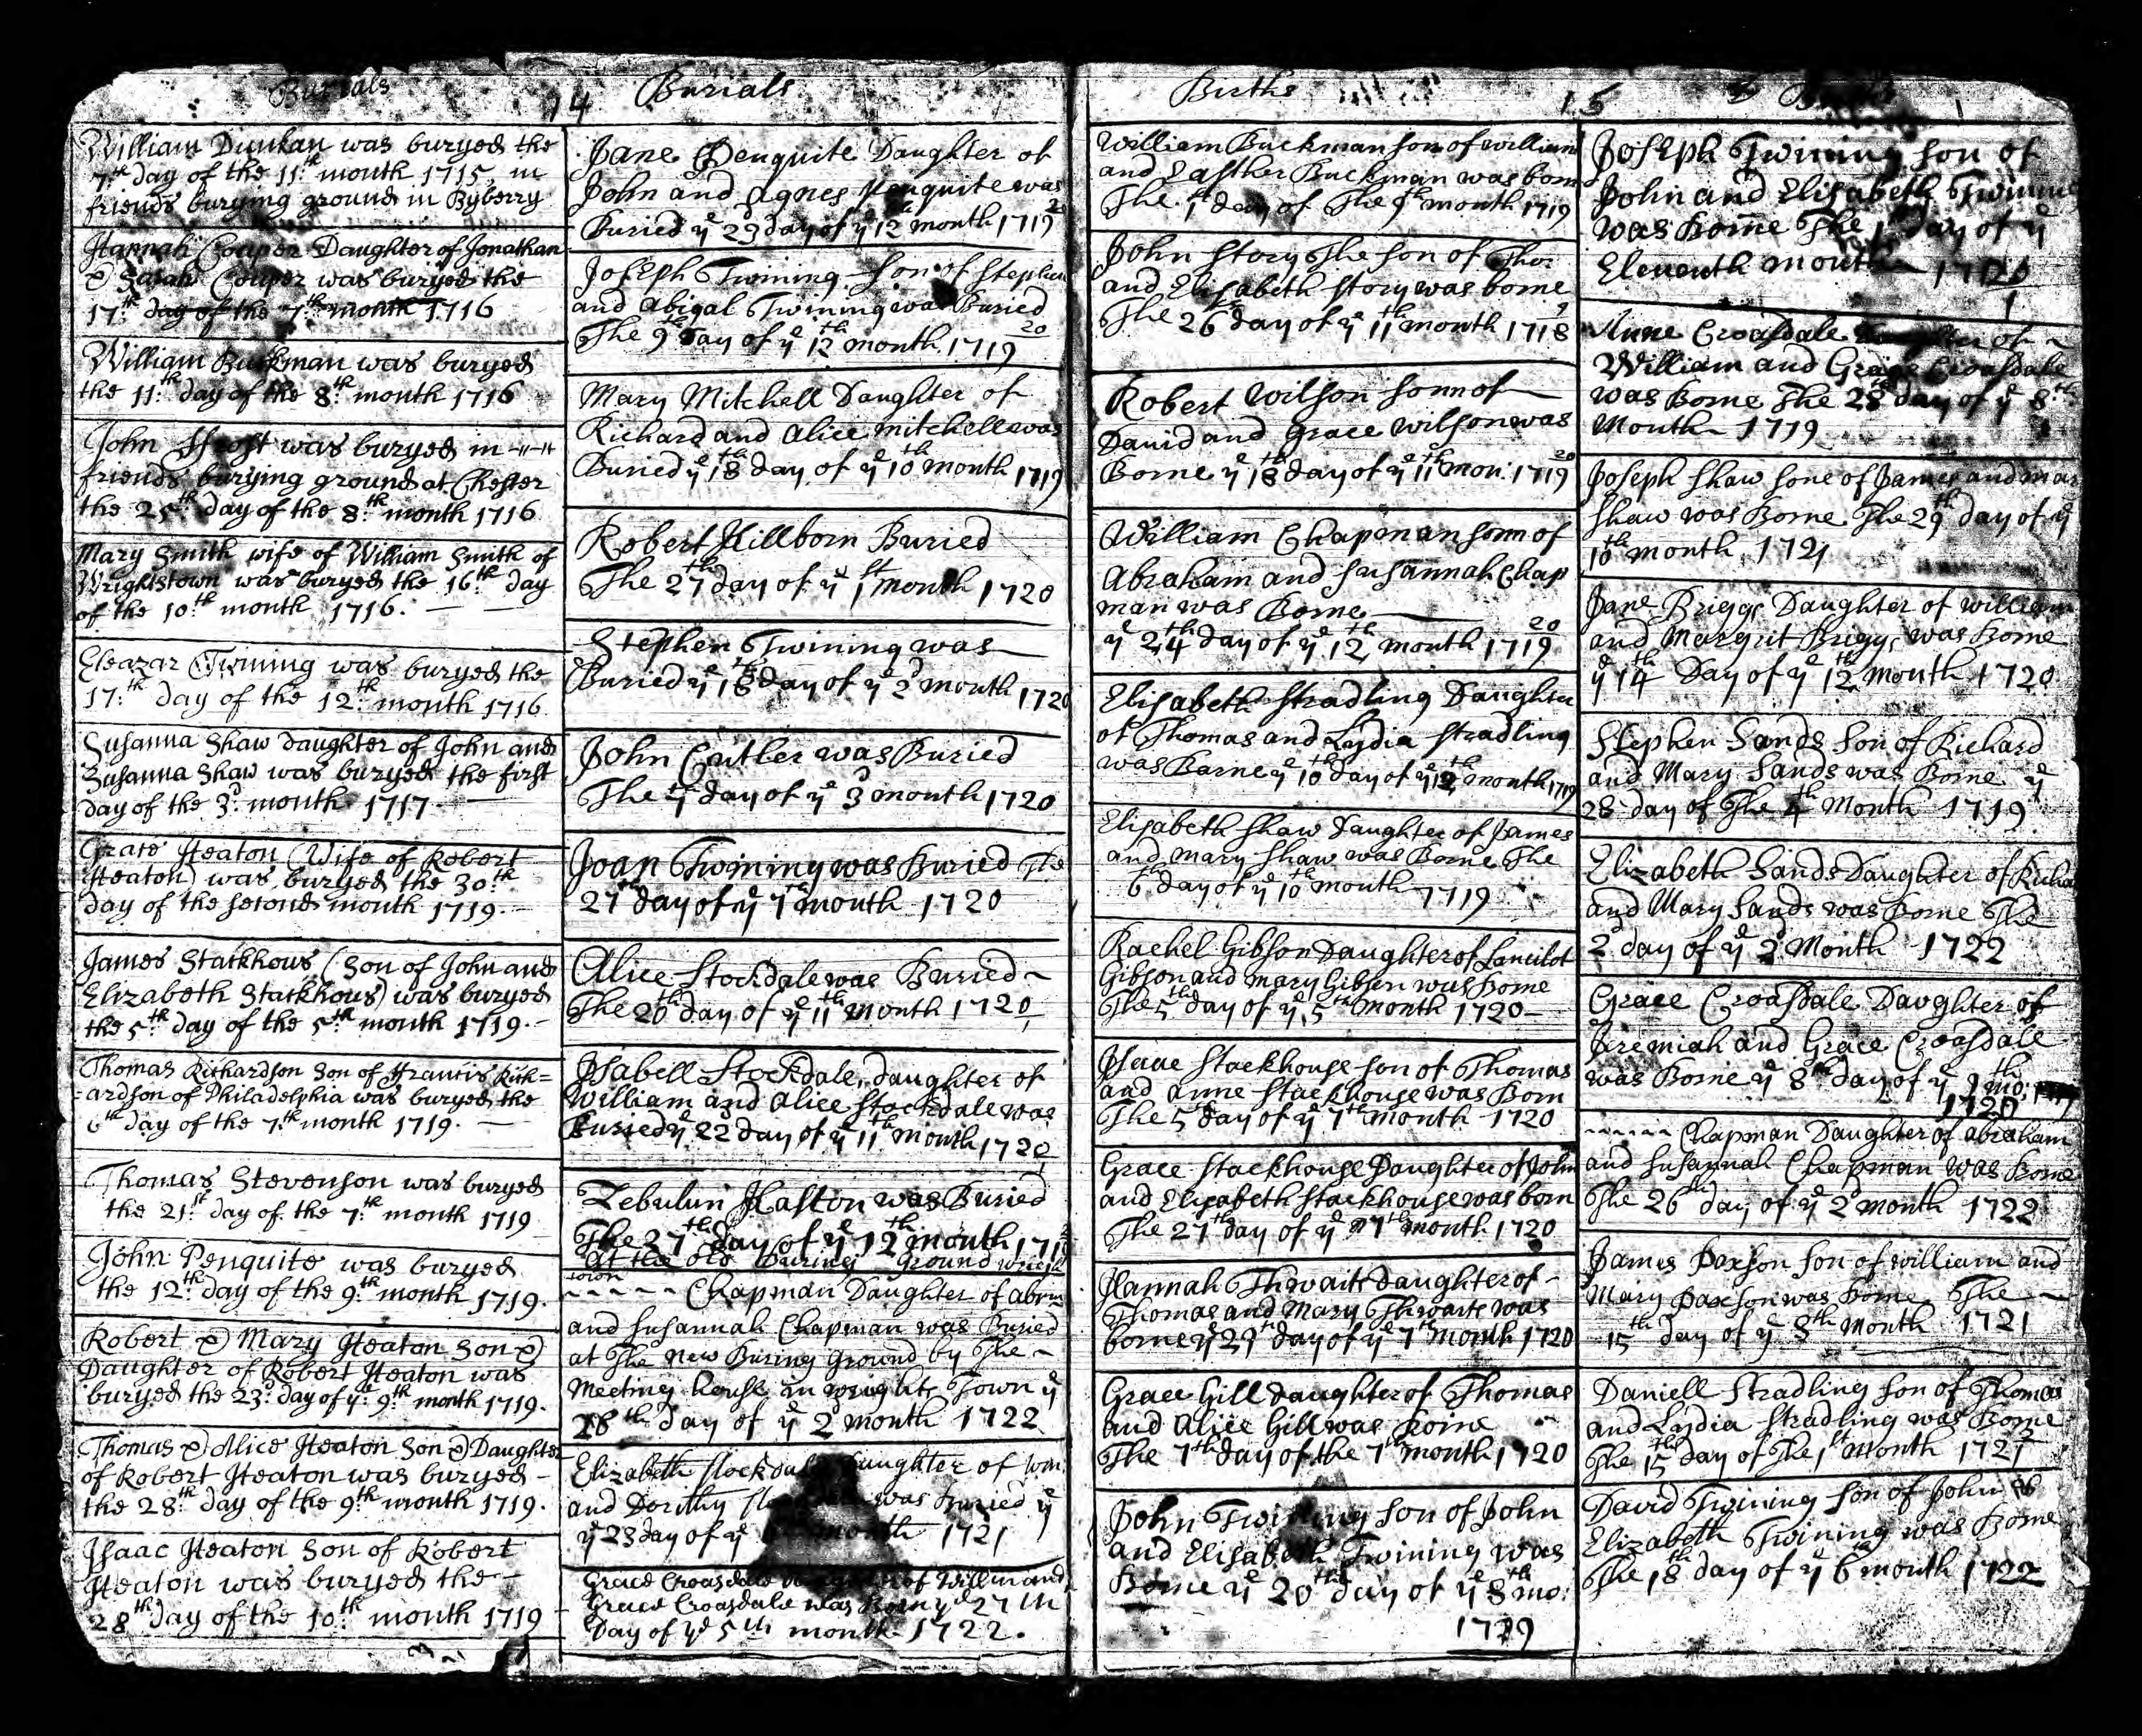 Middletown MM Record of William Buckman's burrial, 1716